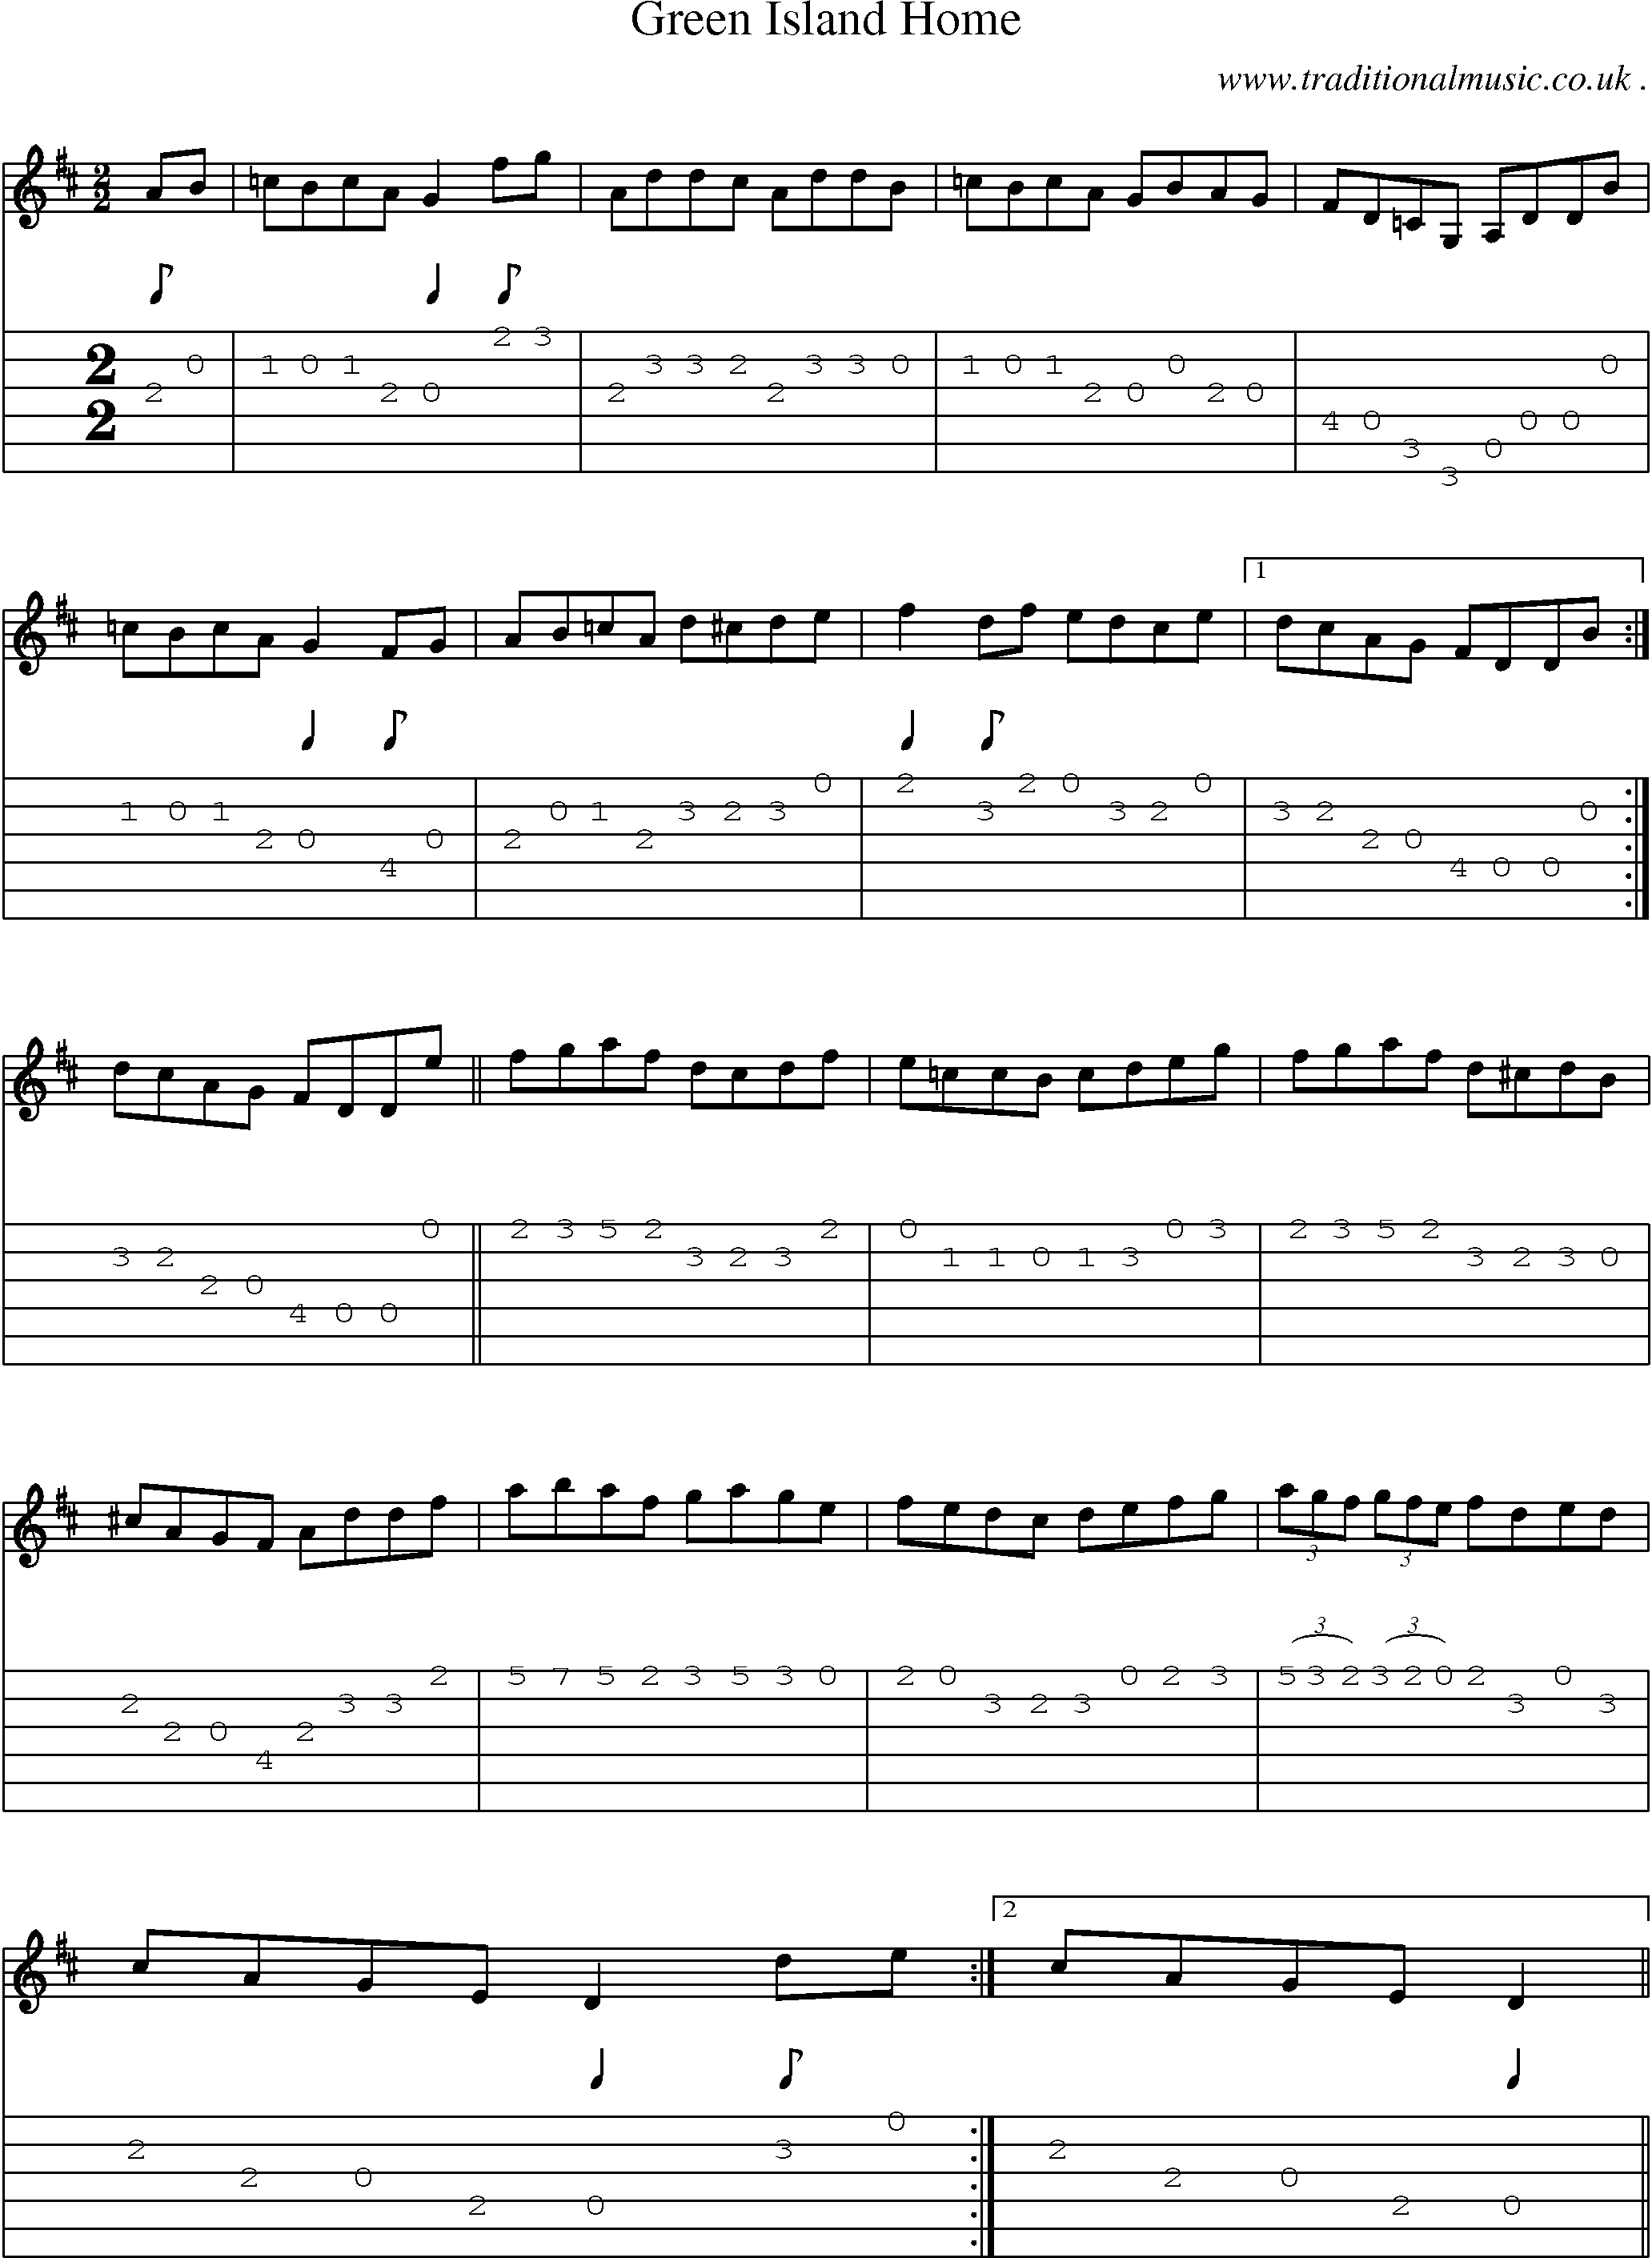 Sheet-Music and Guitar Tabs for Green Island Home